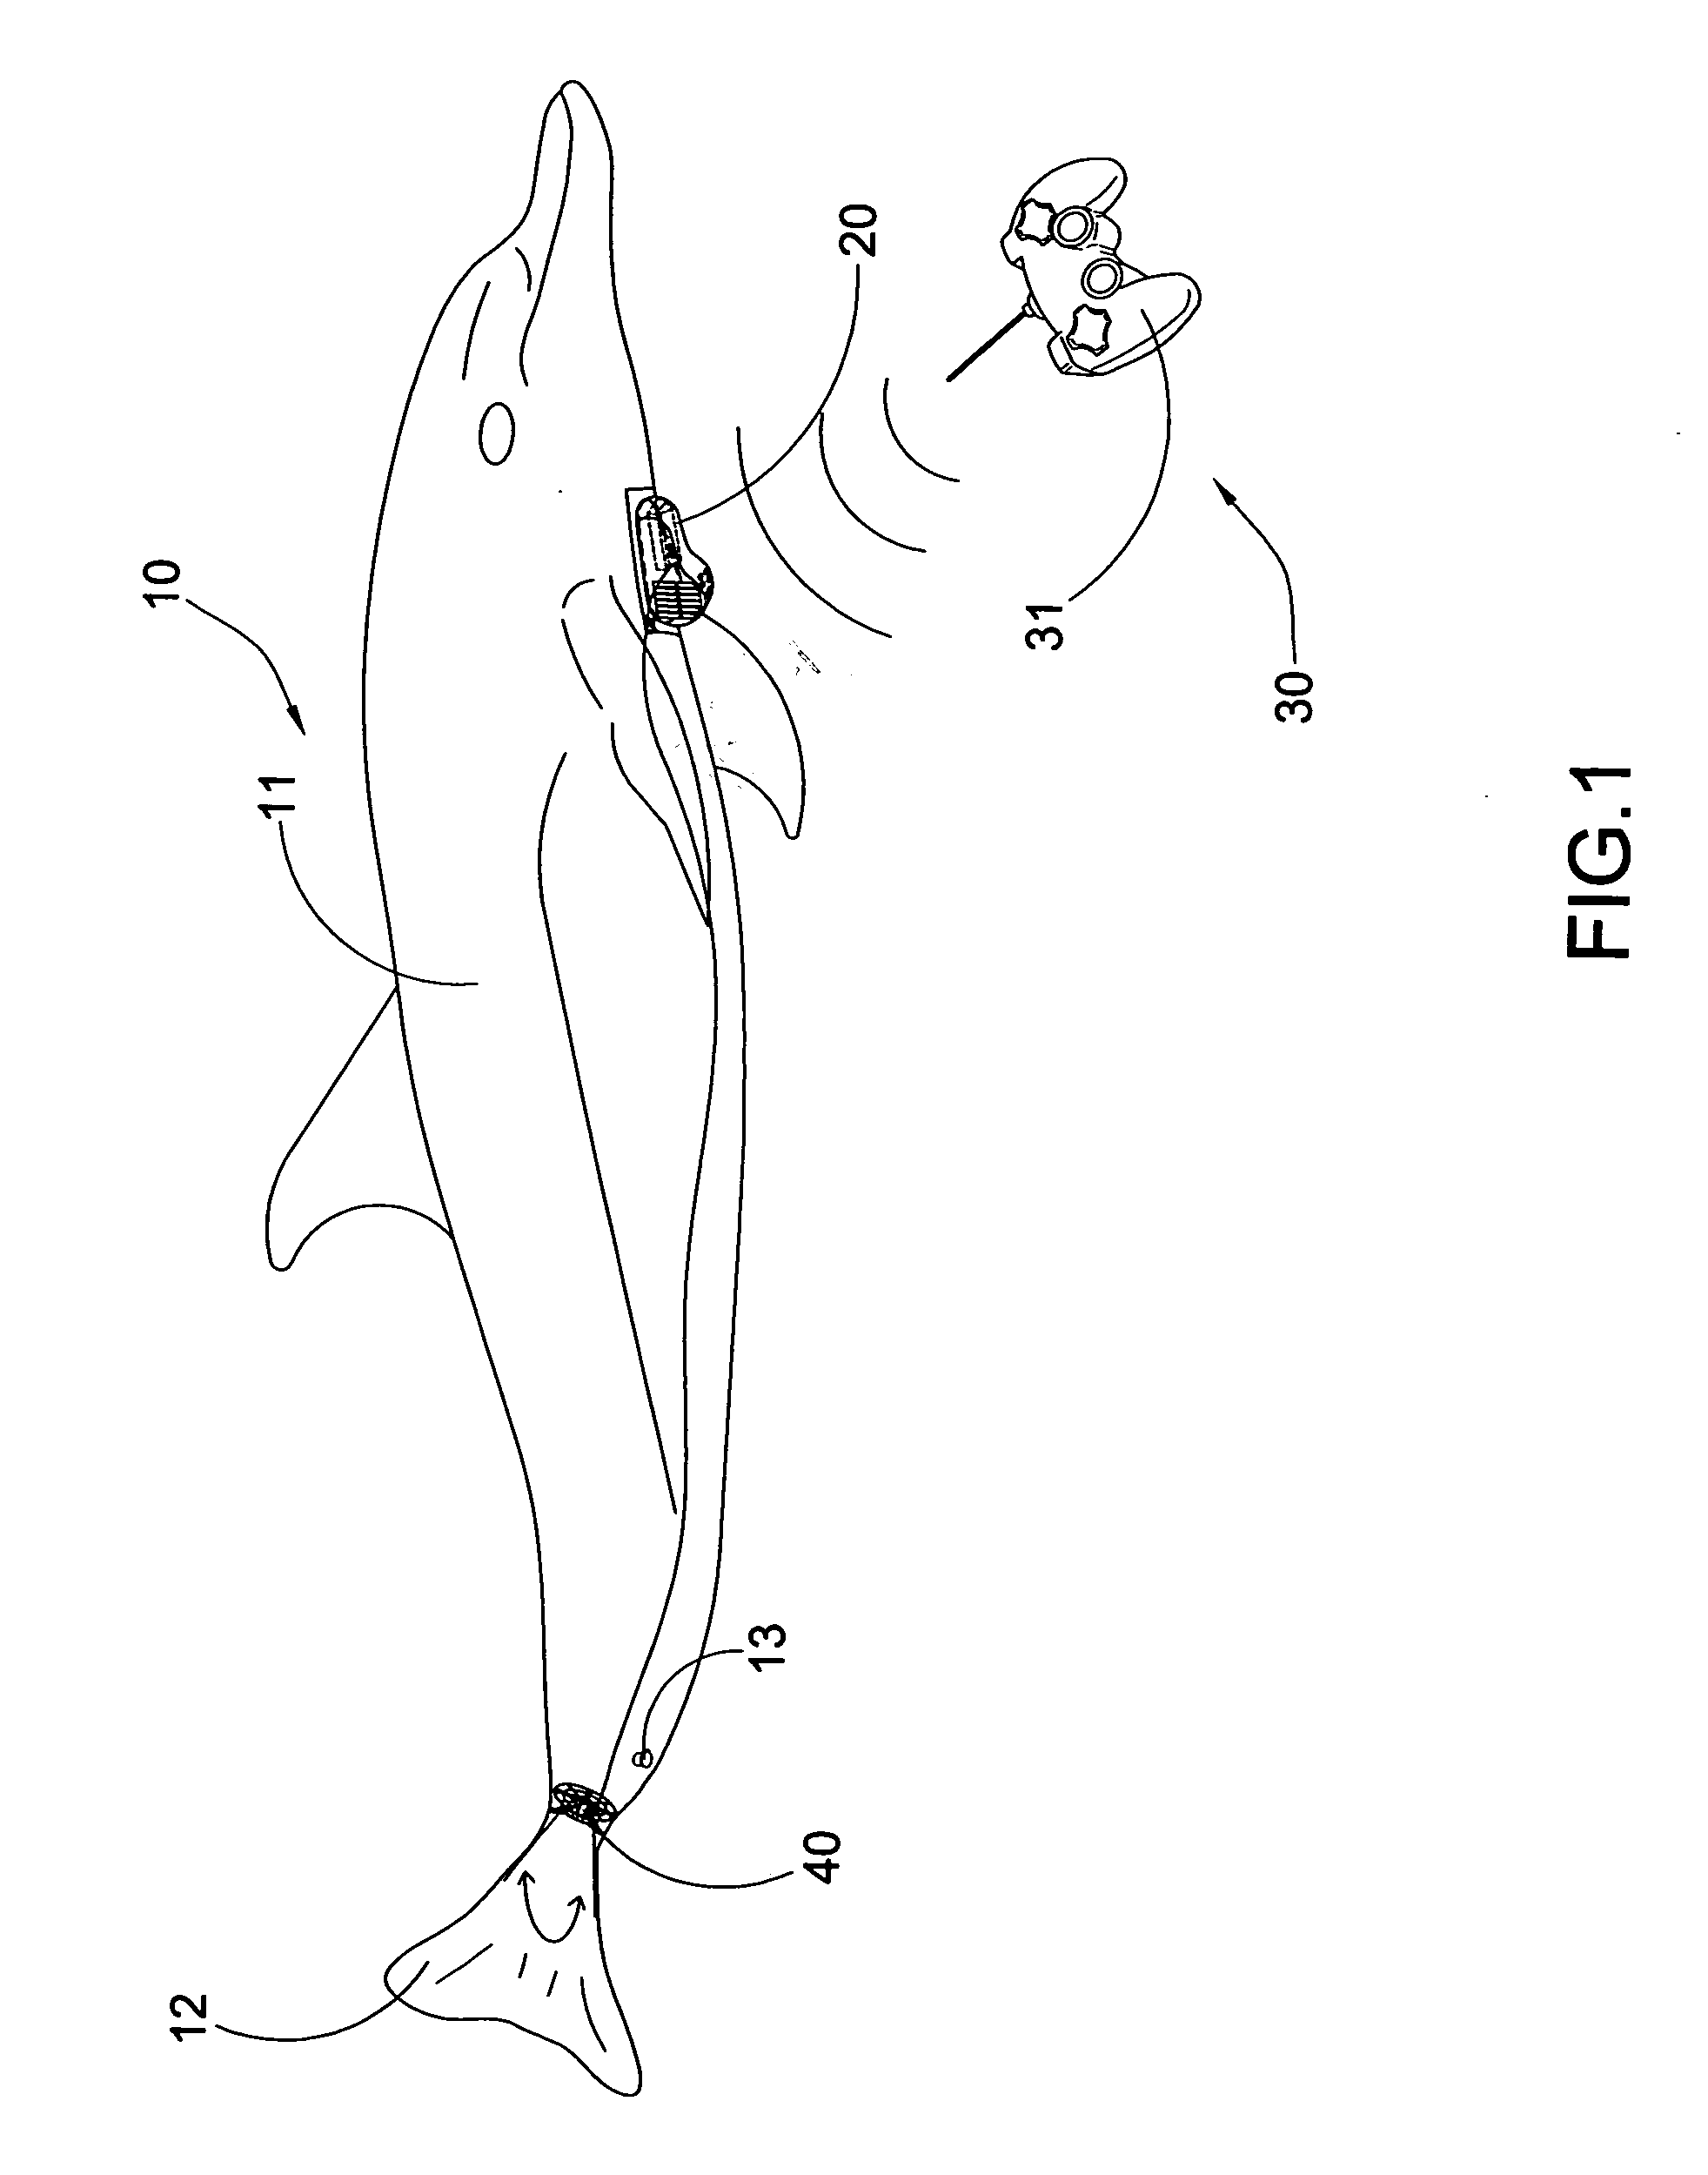 Air swimming toy with driving device